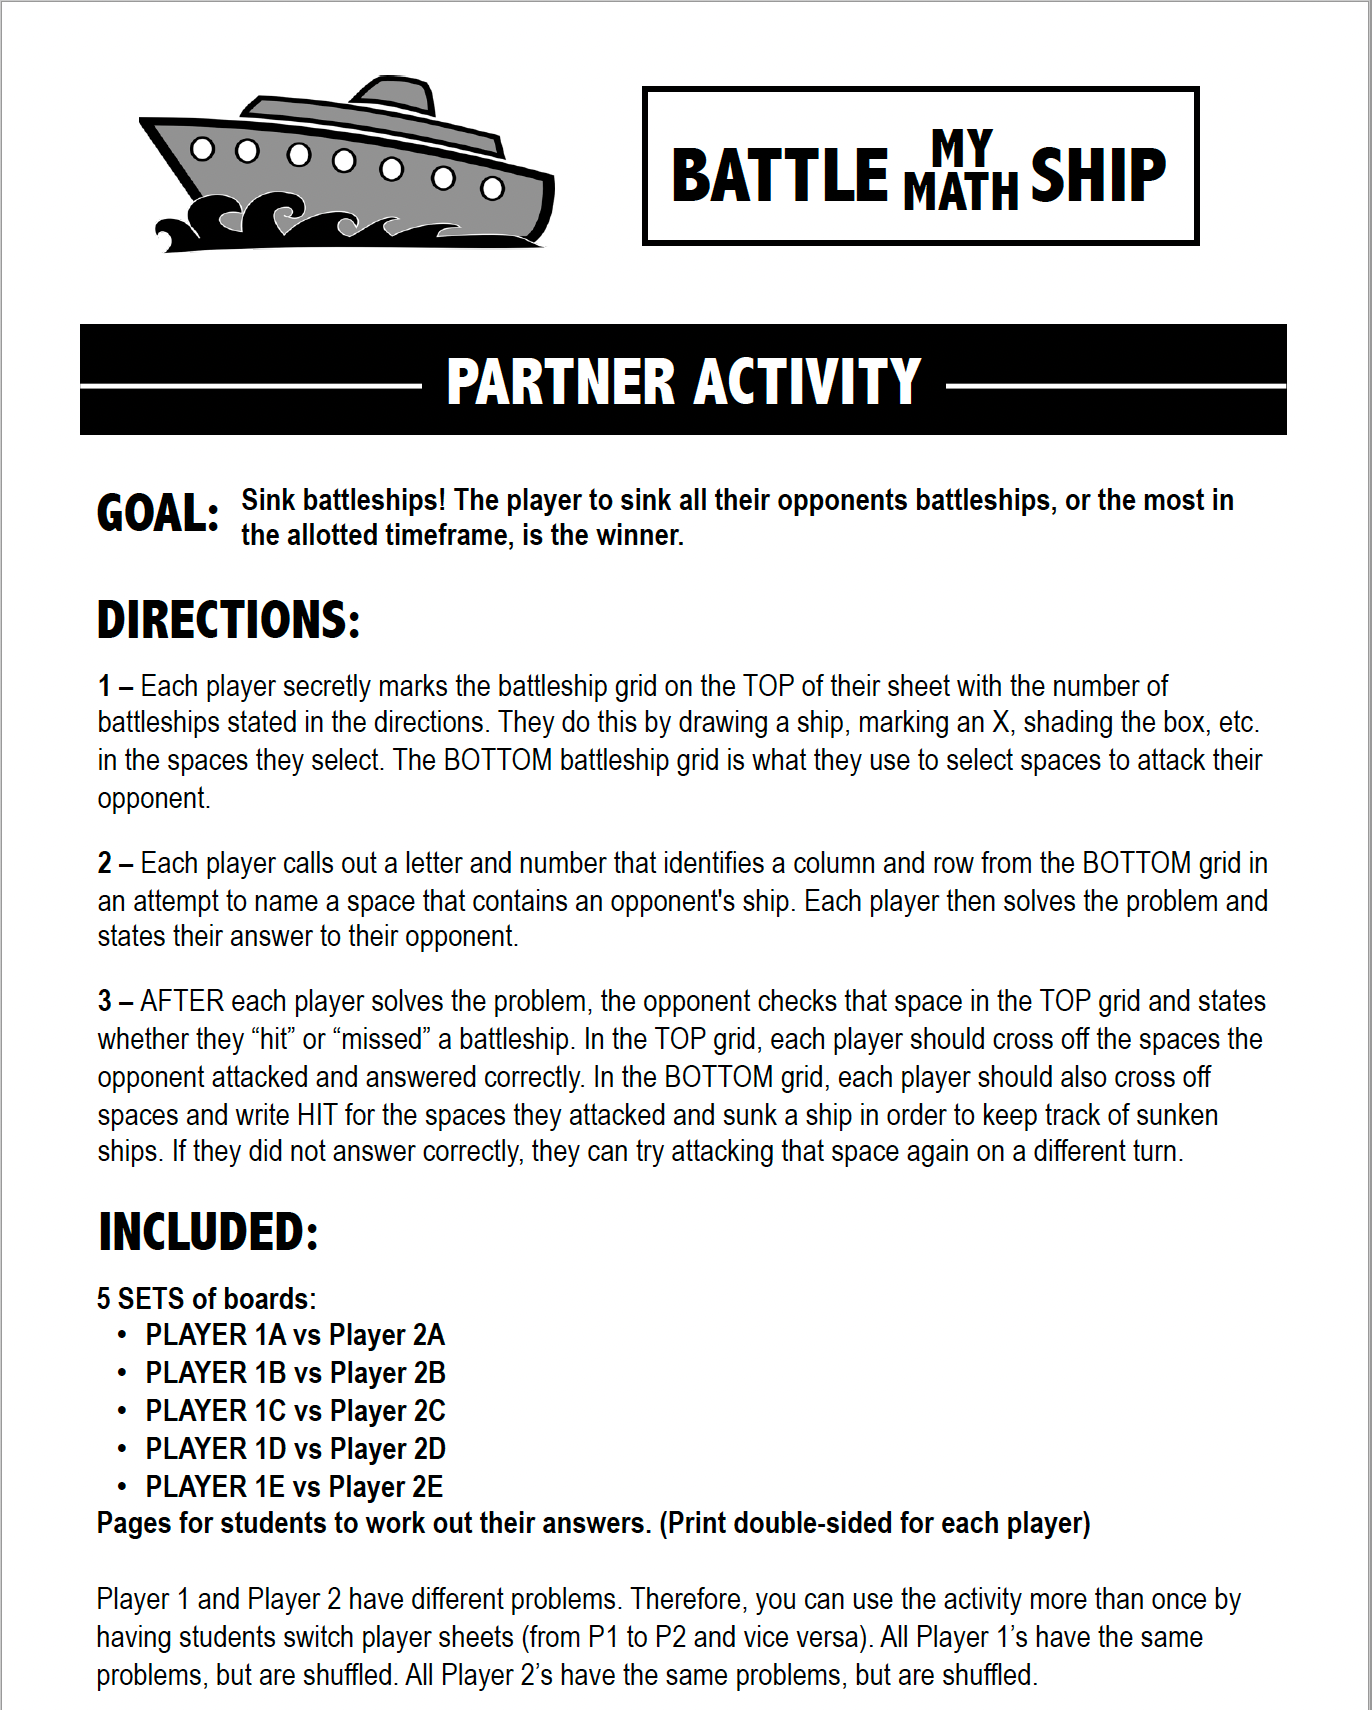 Converting Percents to Fractions Activity | Battle My Math Ship Game